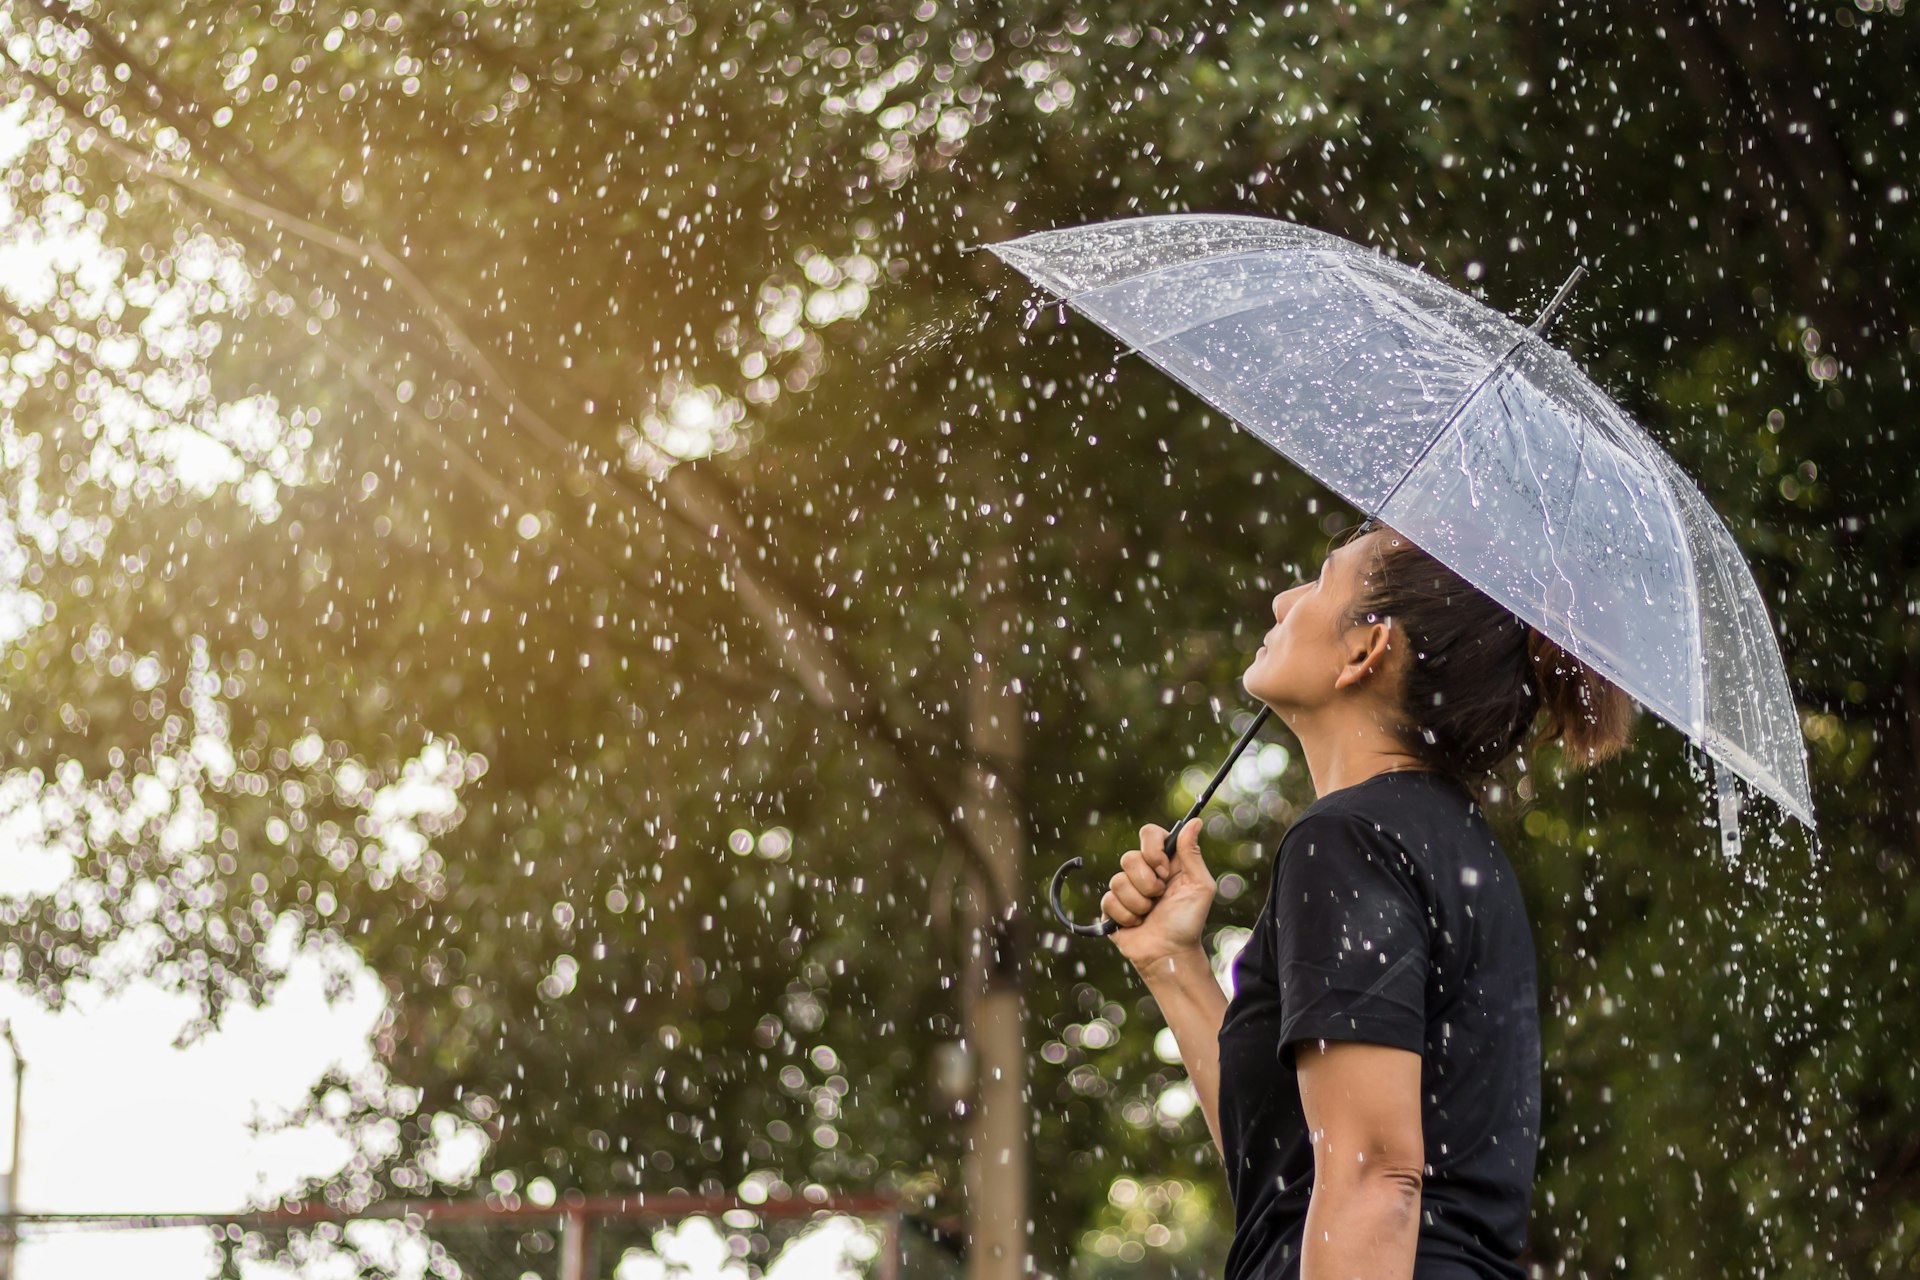 Side view of a woman standing underneath an umbrella and against a tree during rain in Bangkok